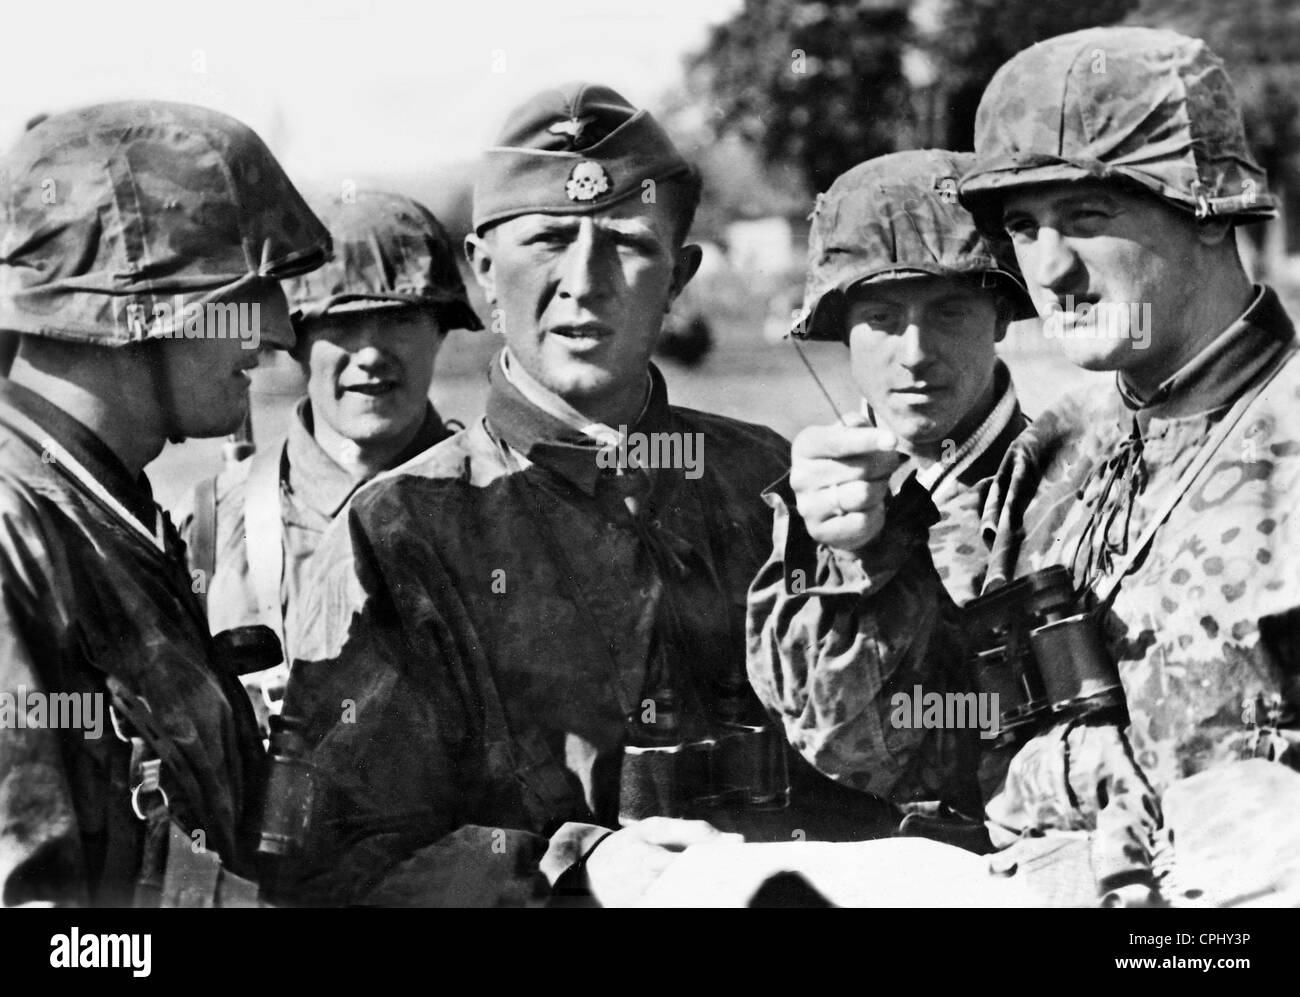 Soldiers of the Waffen-SS on the Eastern Front, 1942 Stock Photo